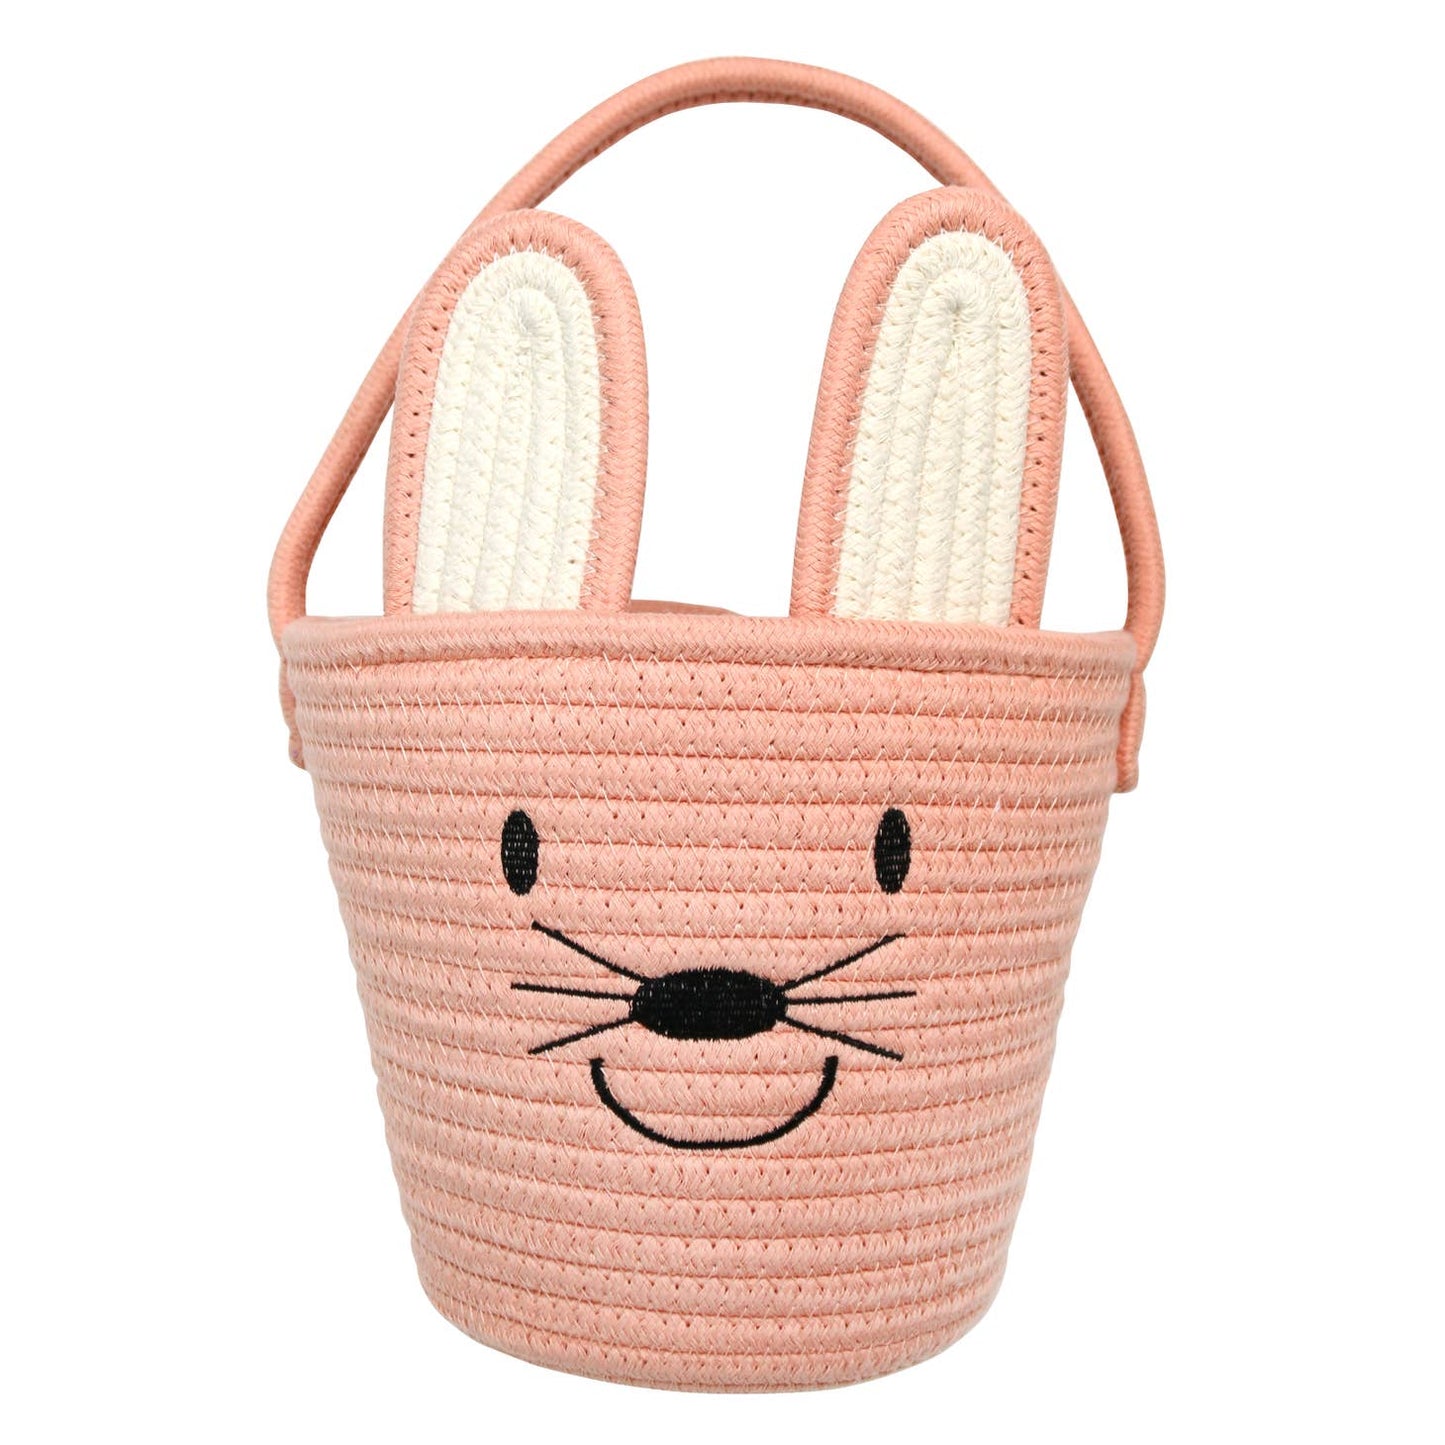 Emerson and Friends rope basket